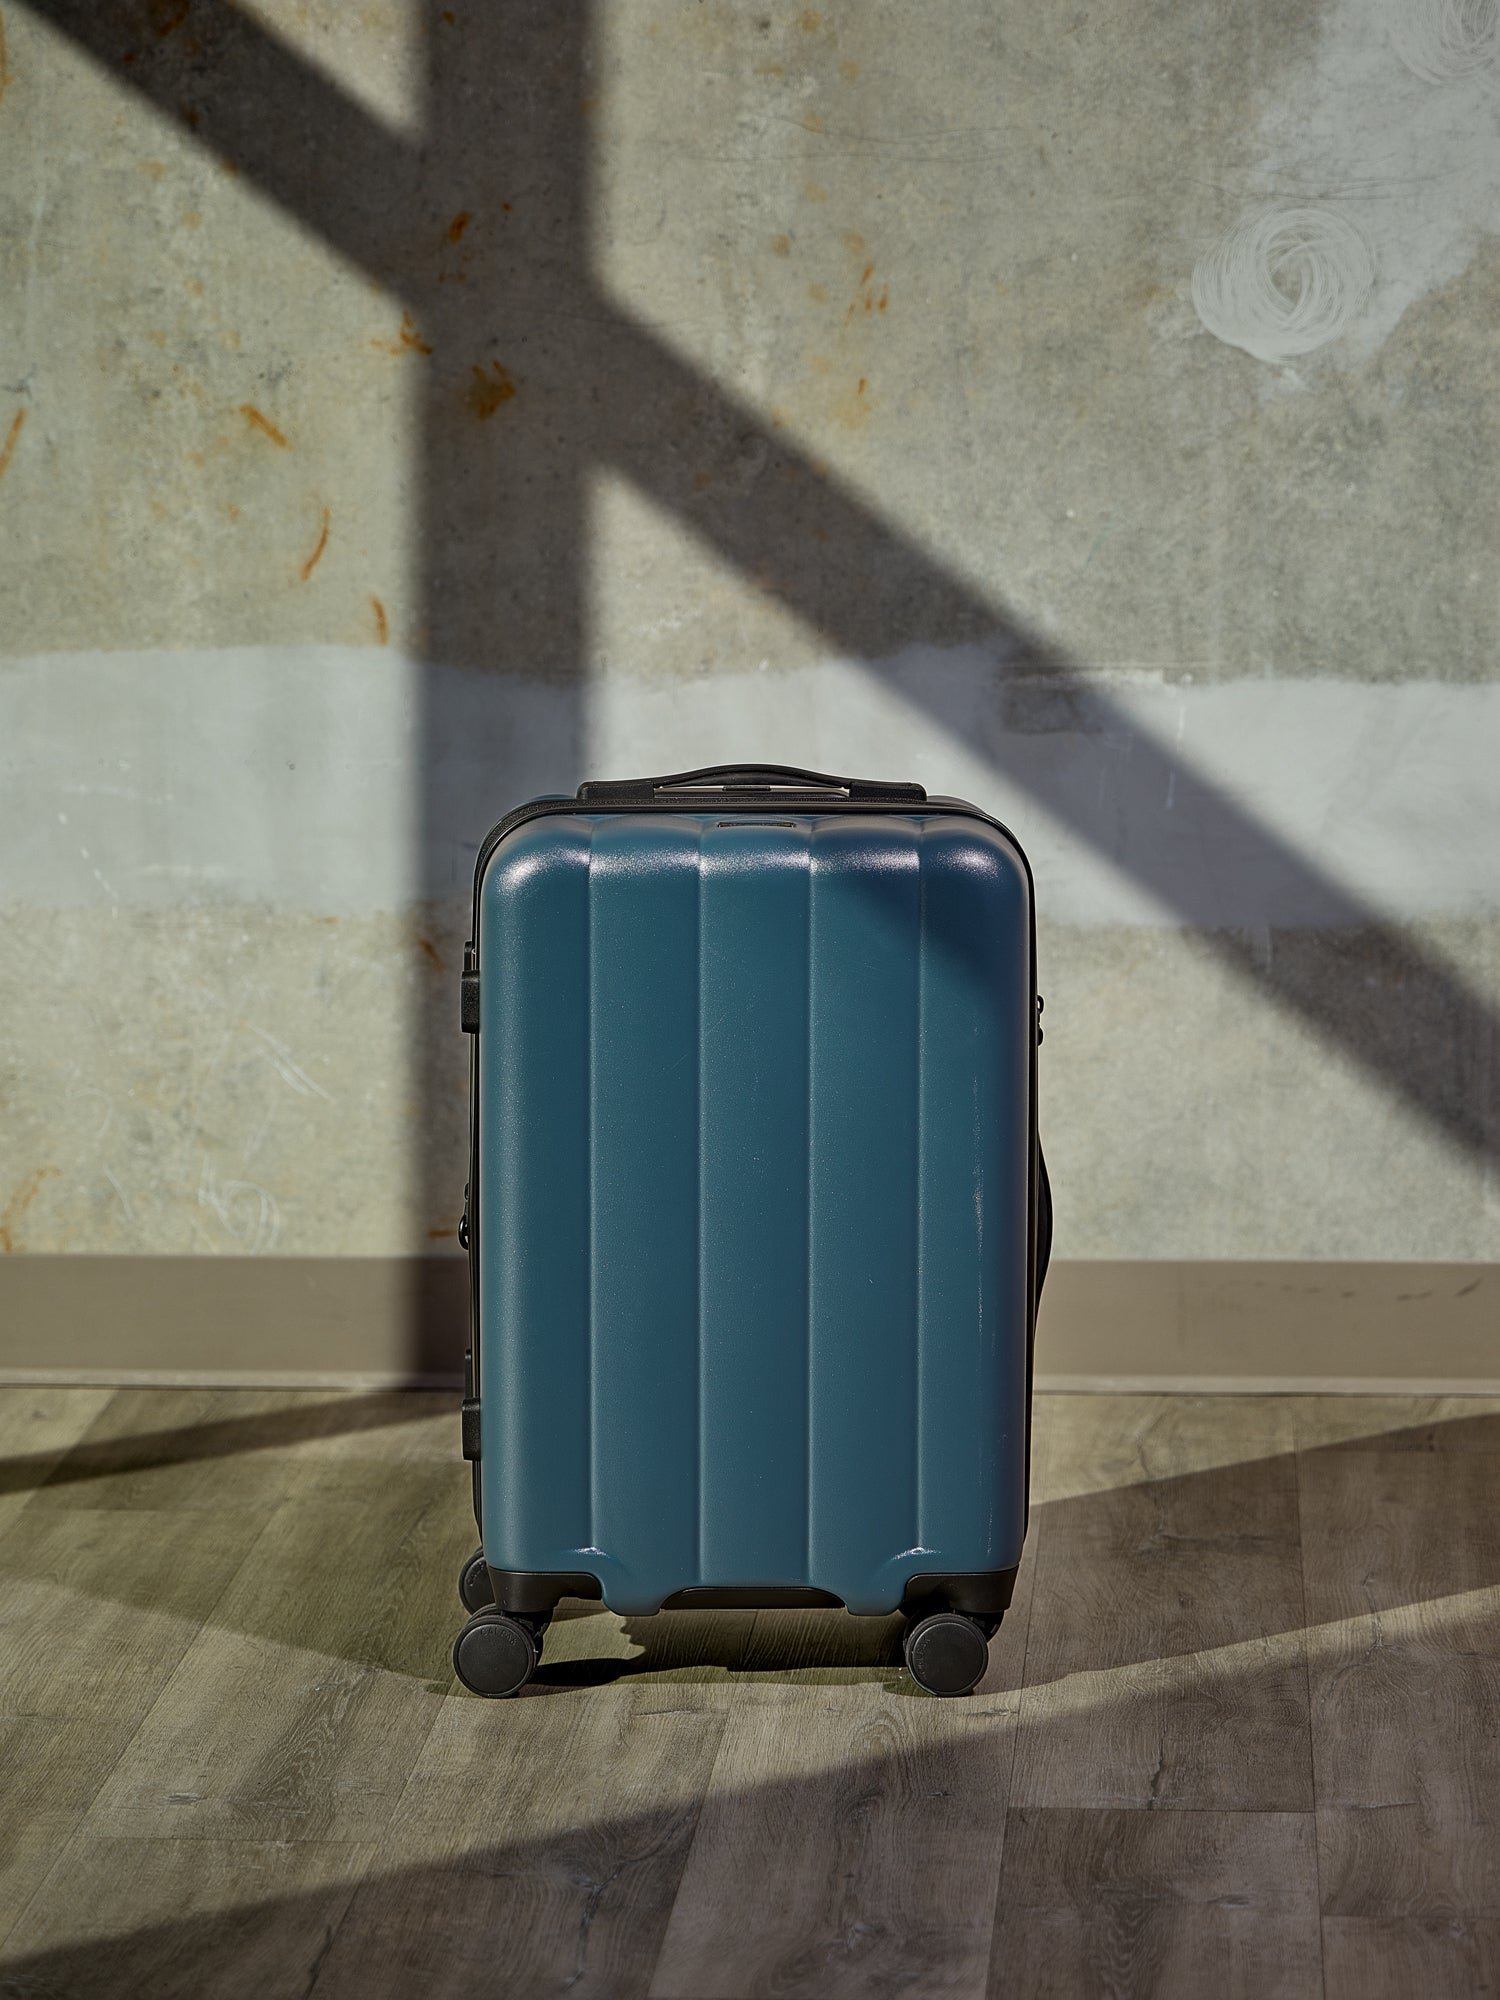 CALPAK Evry Carry-On Luggage in pacific blue featuring dual spinner wheels